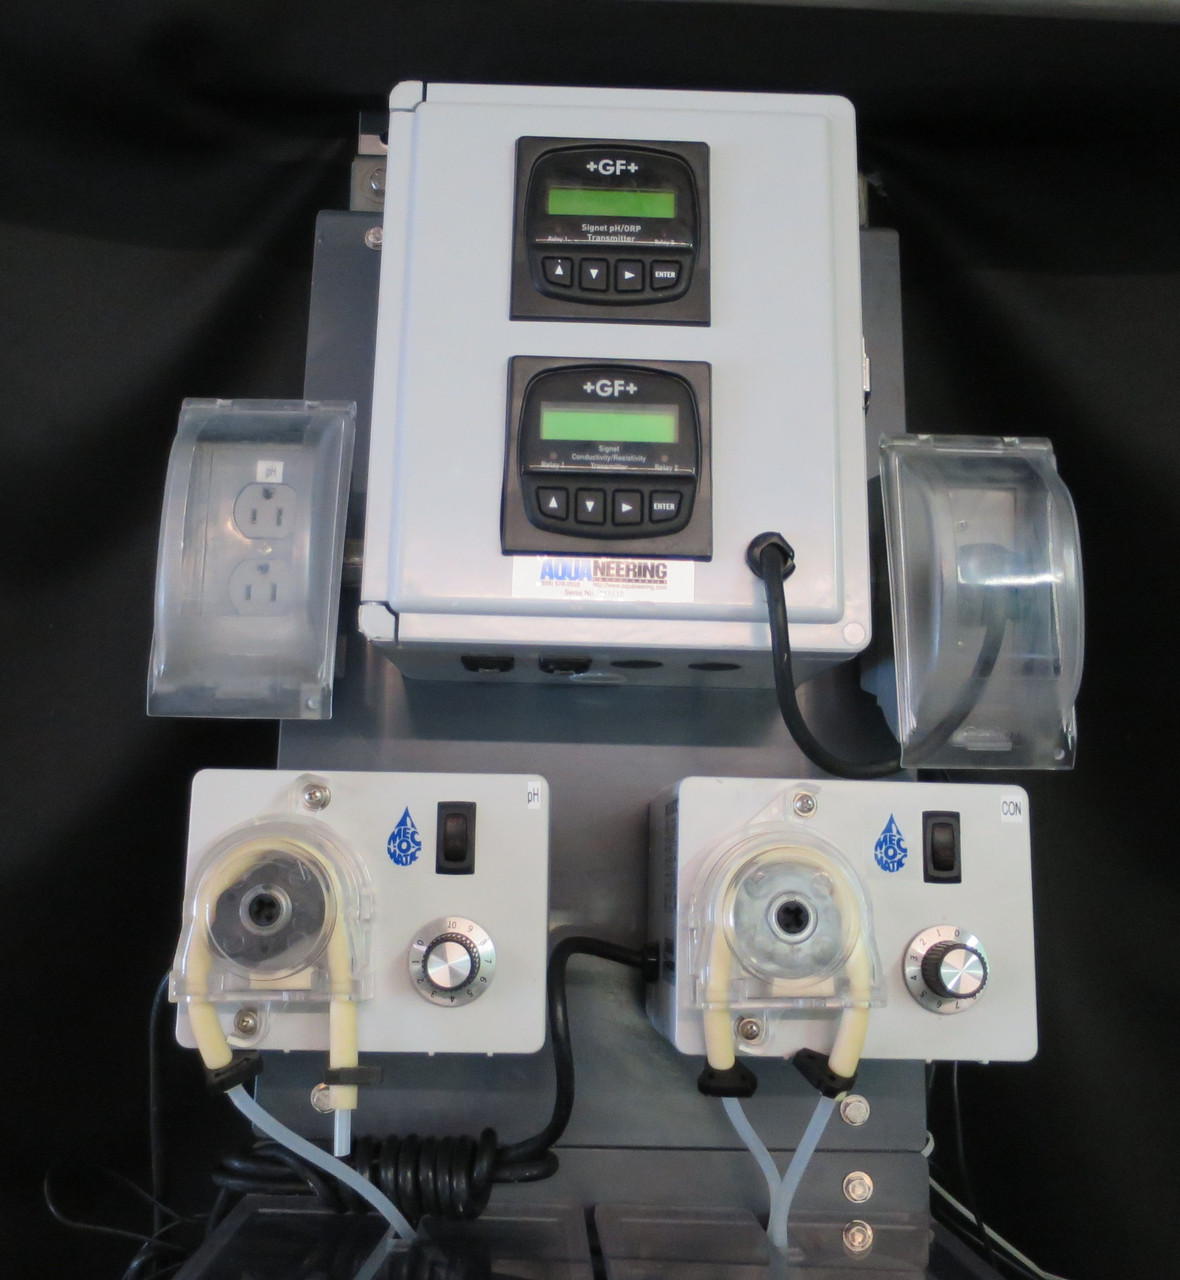 AQUANEERING PH TRANSMITTER DOSING SYSTEM **AS IS, PARTS ONLY**